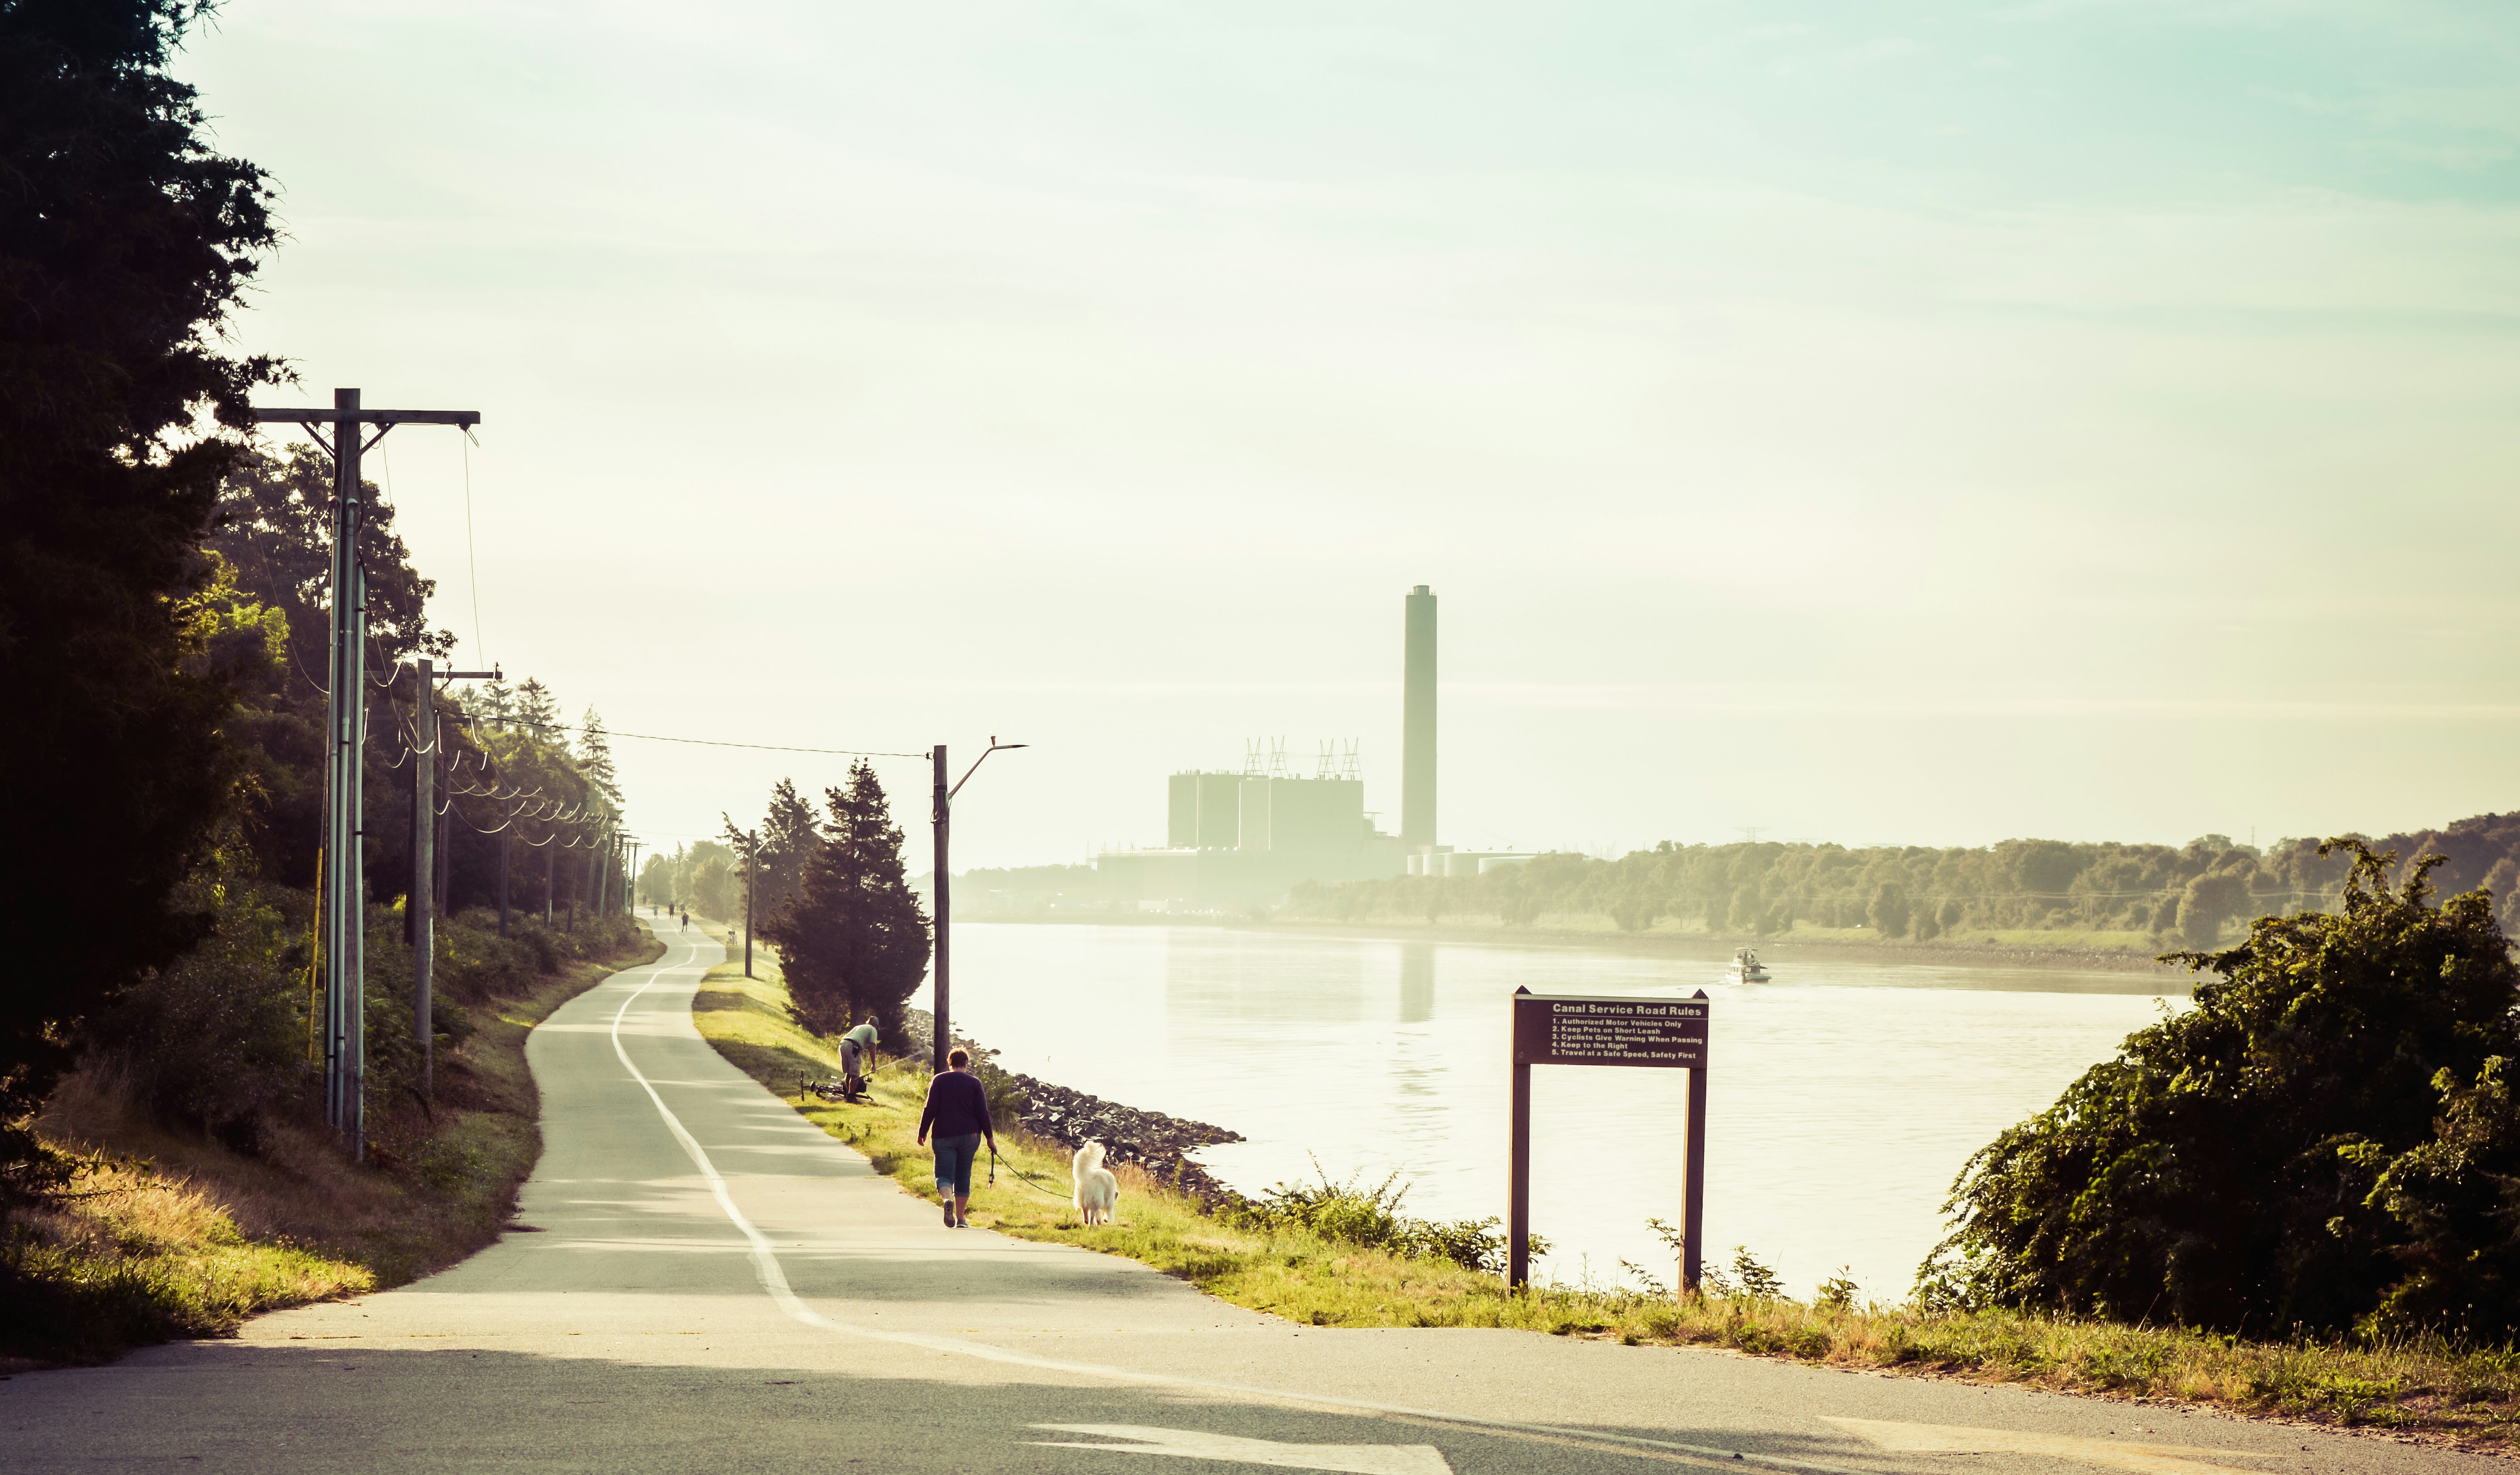 Cape Cod canal near Sagamore bridge on a early morning. With a view of the power plant.